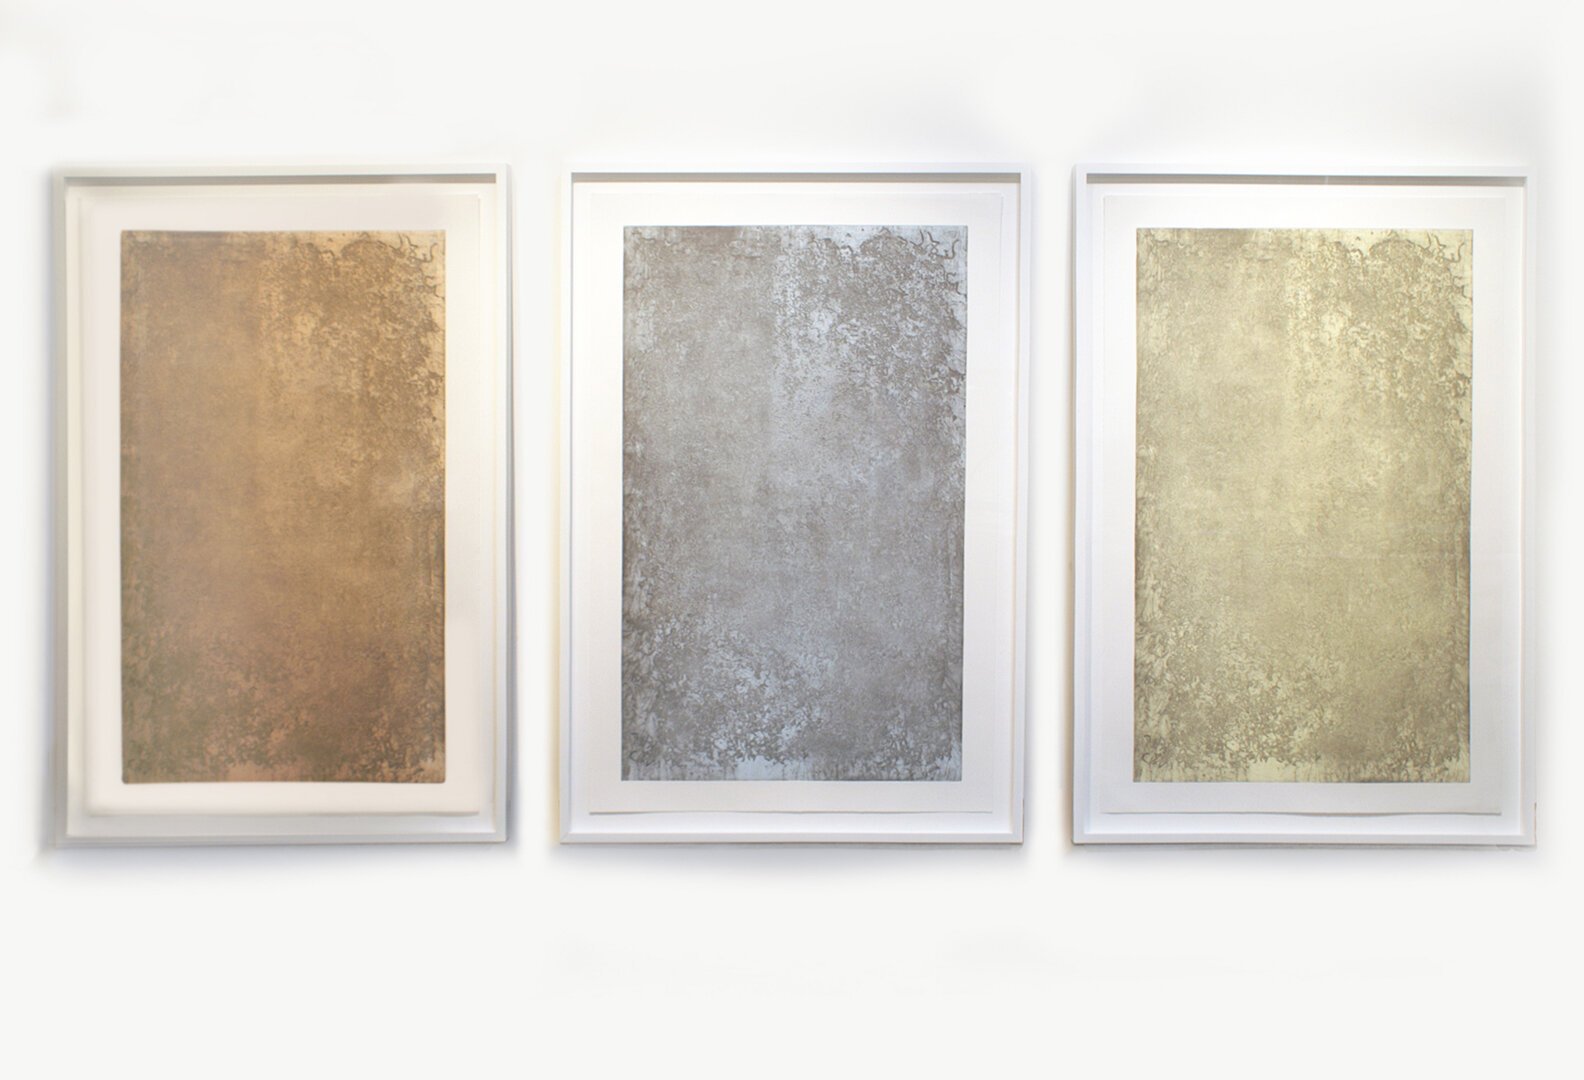  Sunlight Series, 2012, Sundown, Rising Sun, Daybreak, Color relief and soft ground etching on BFK paper, Edition of 3, 58 x 38 inches 